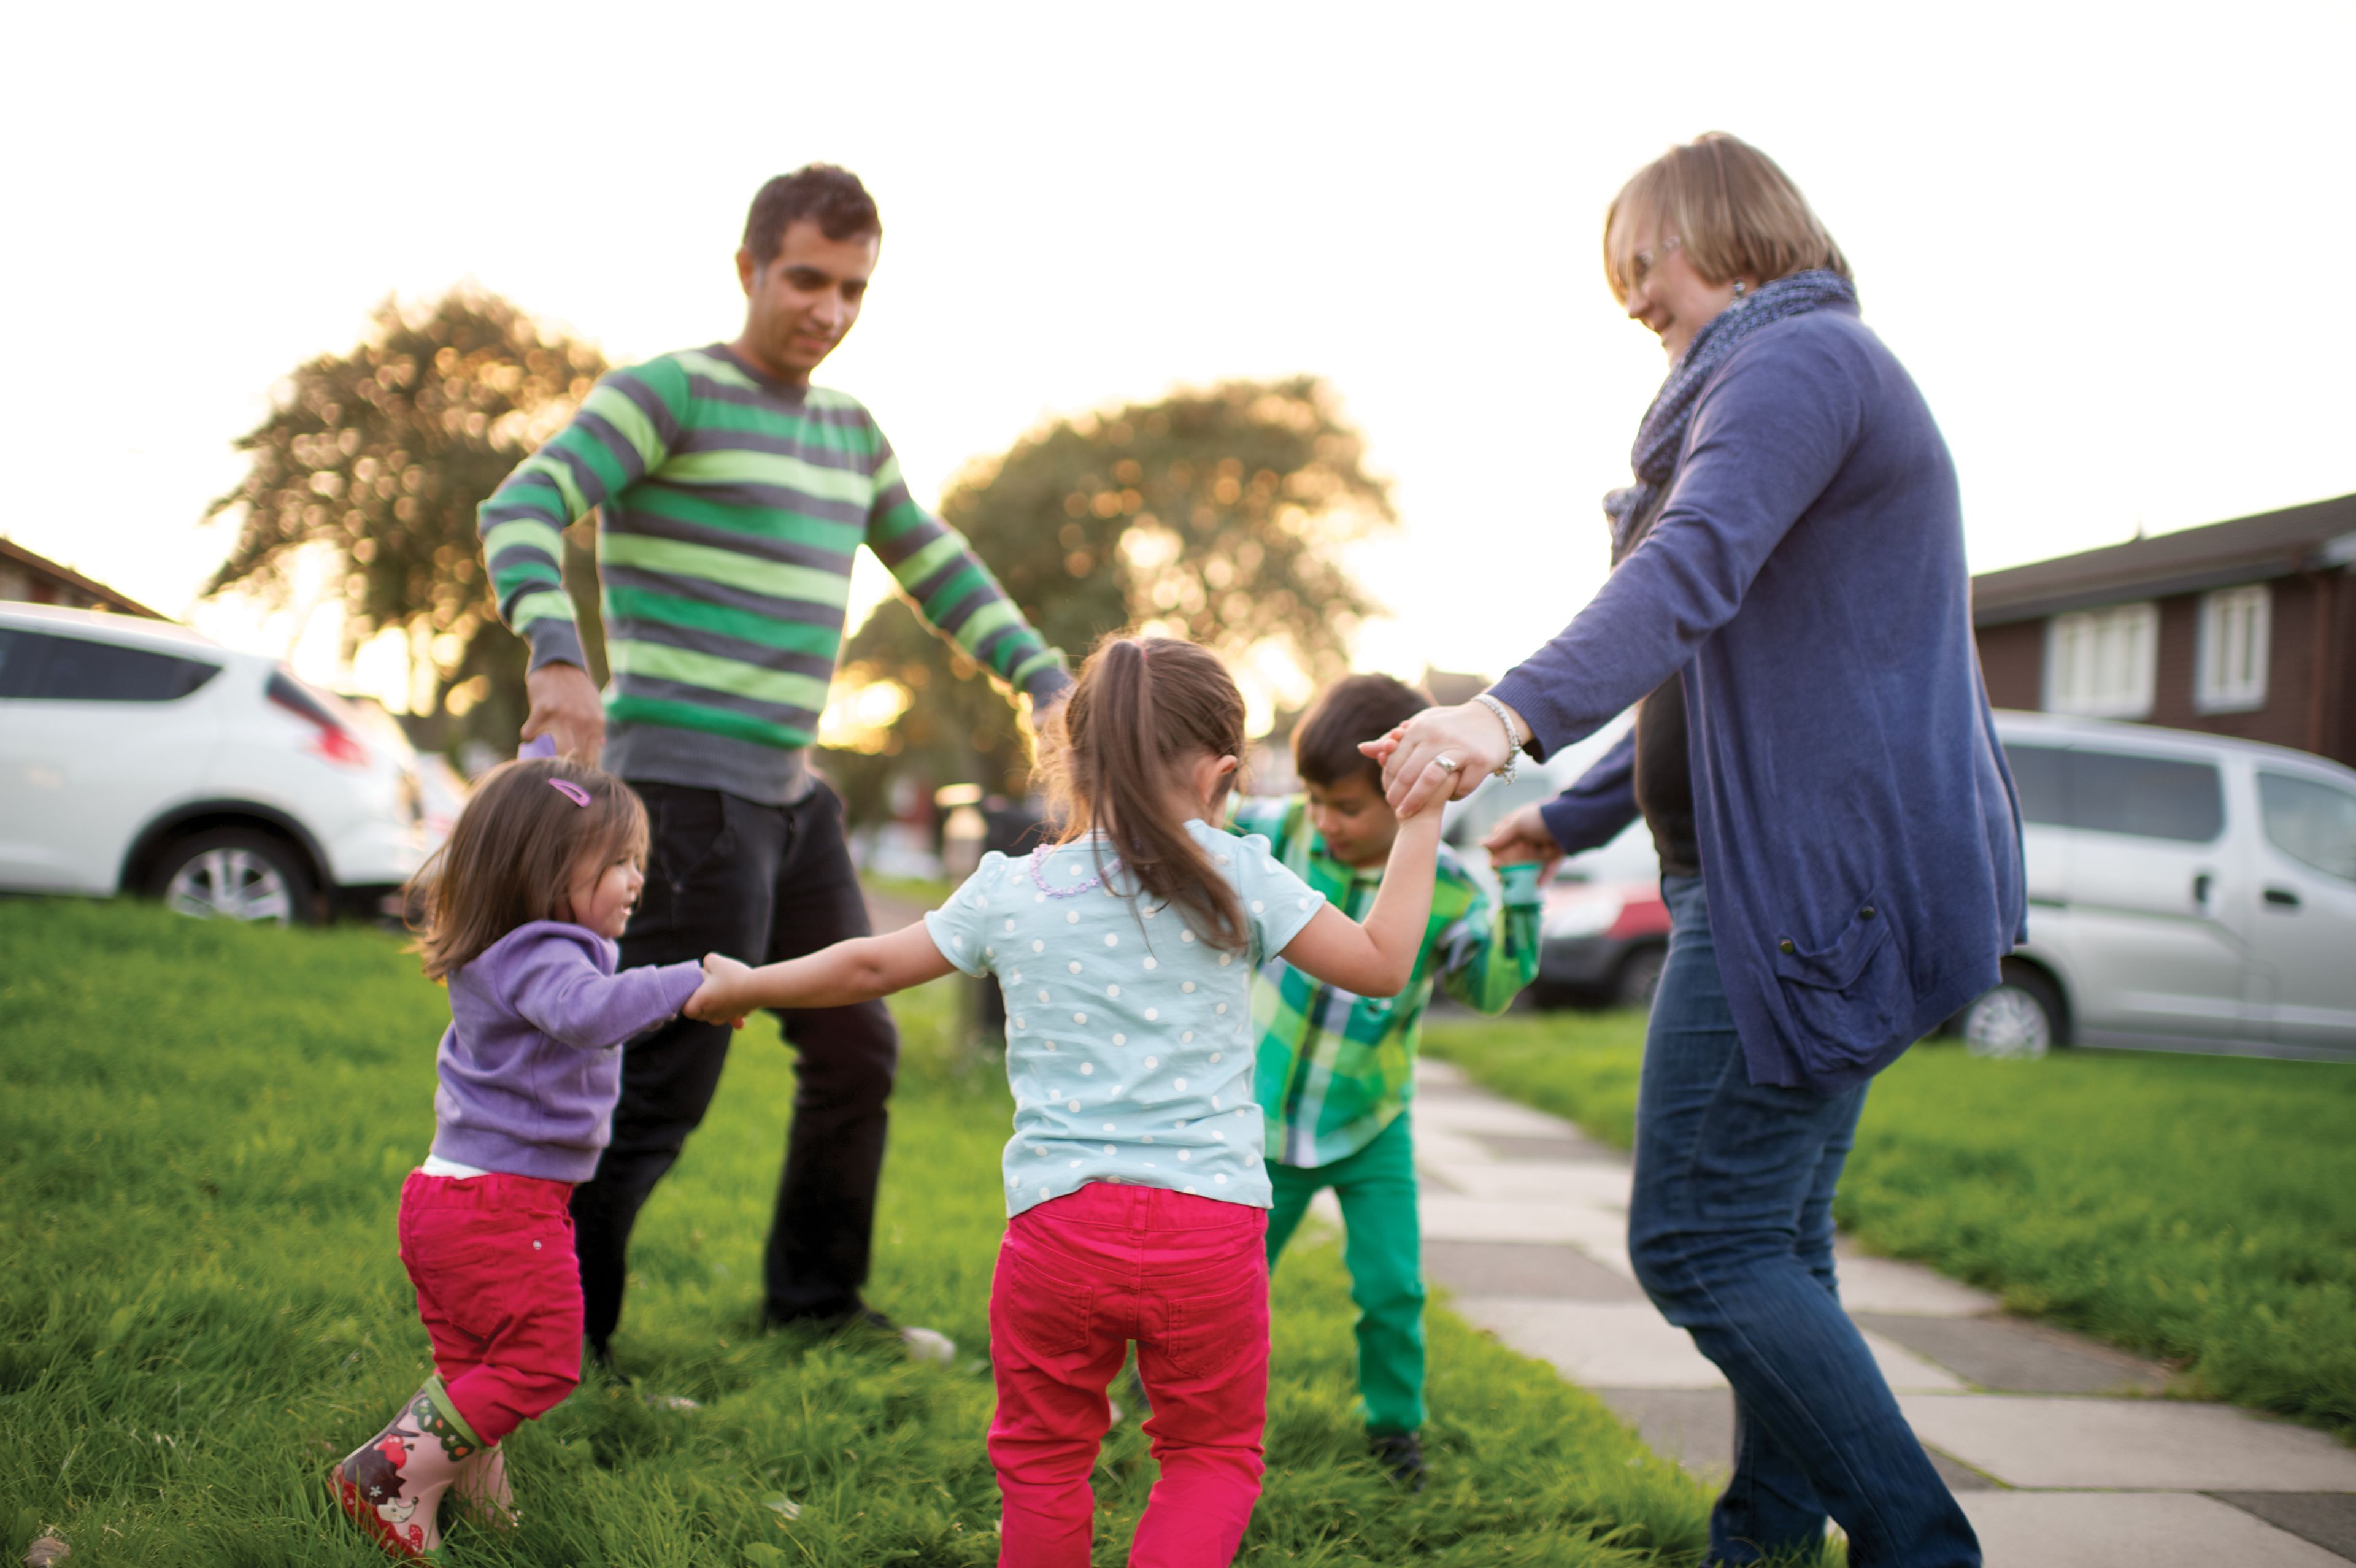 A father and mother playing “Ring around the Rosie” outside with their children.